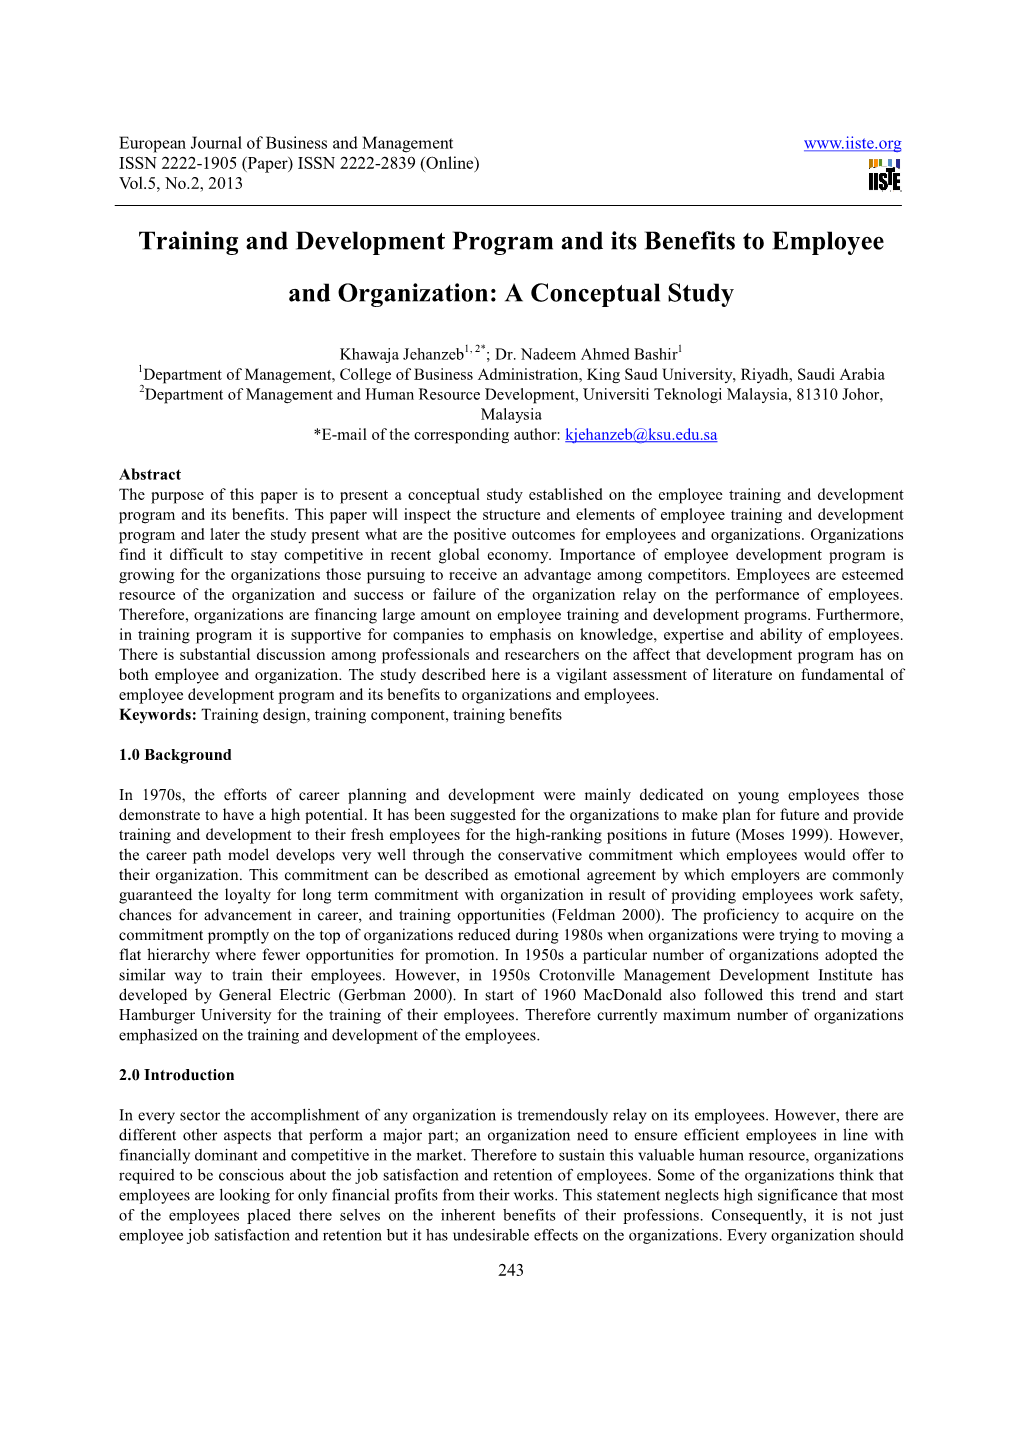 Training and Development Program and Its Benefits to Employee and Organization: a Conceptual Study